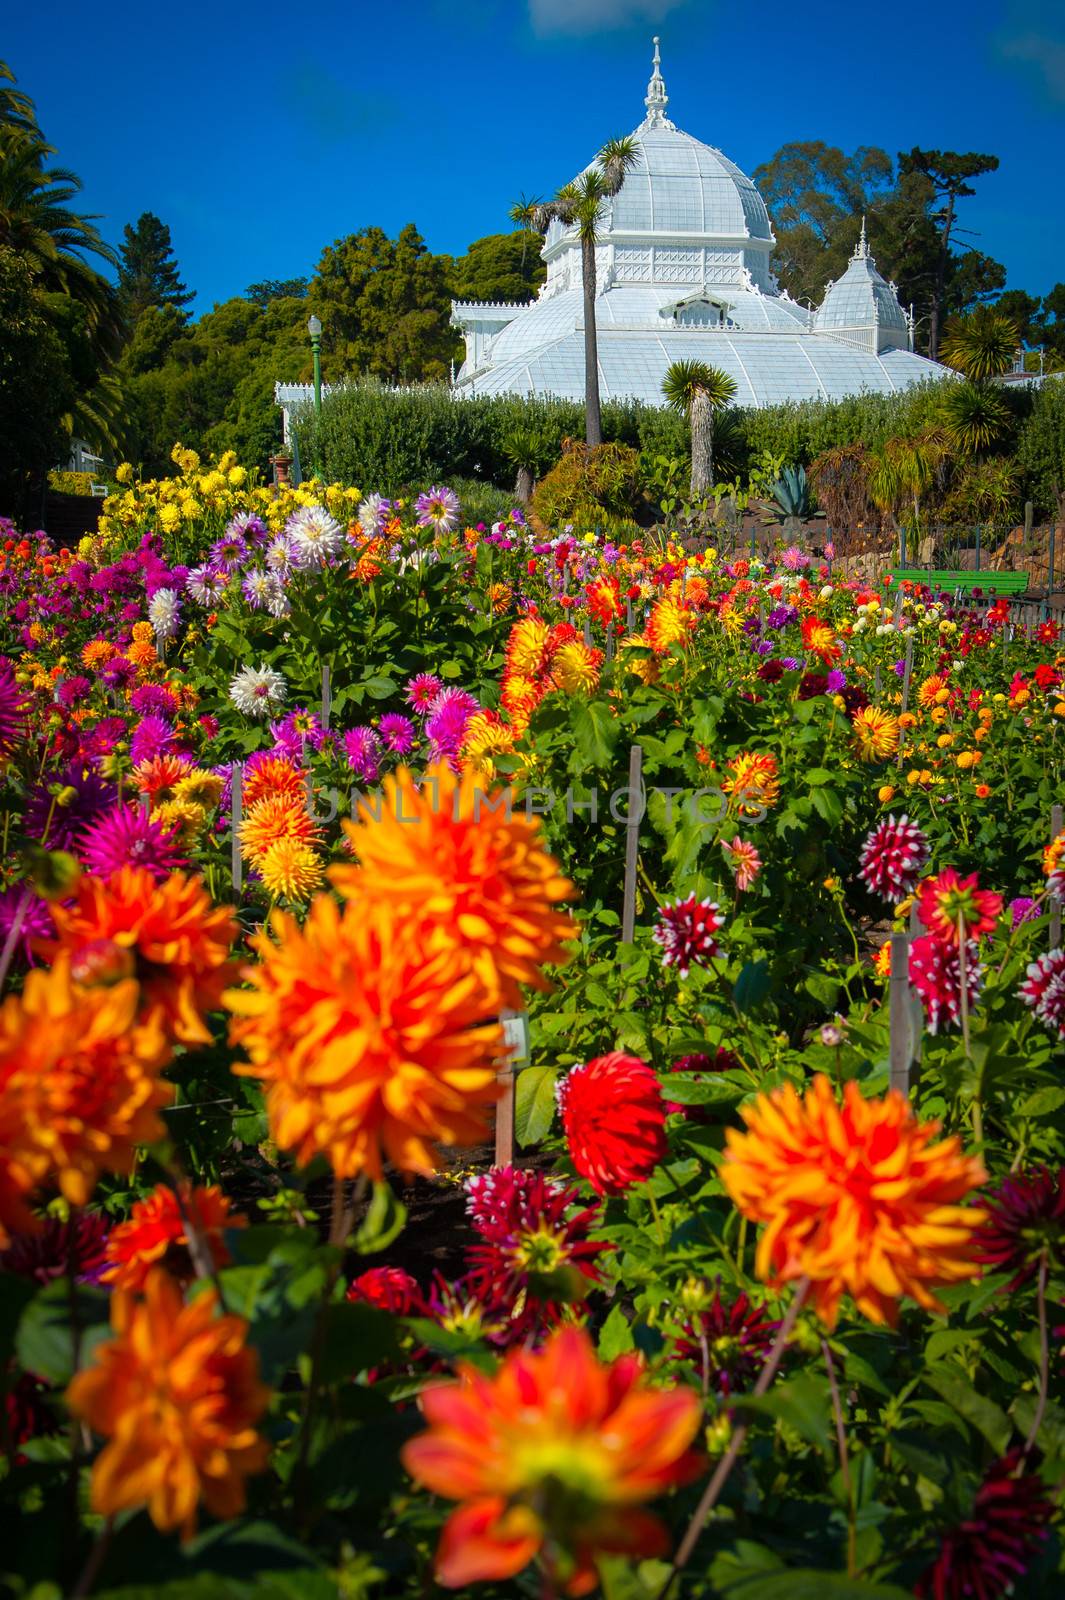 Flowers in a garden with a building in the background, Civic Center, San Francisco, California, USA